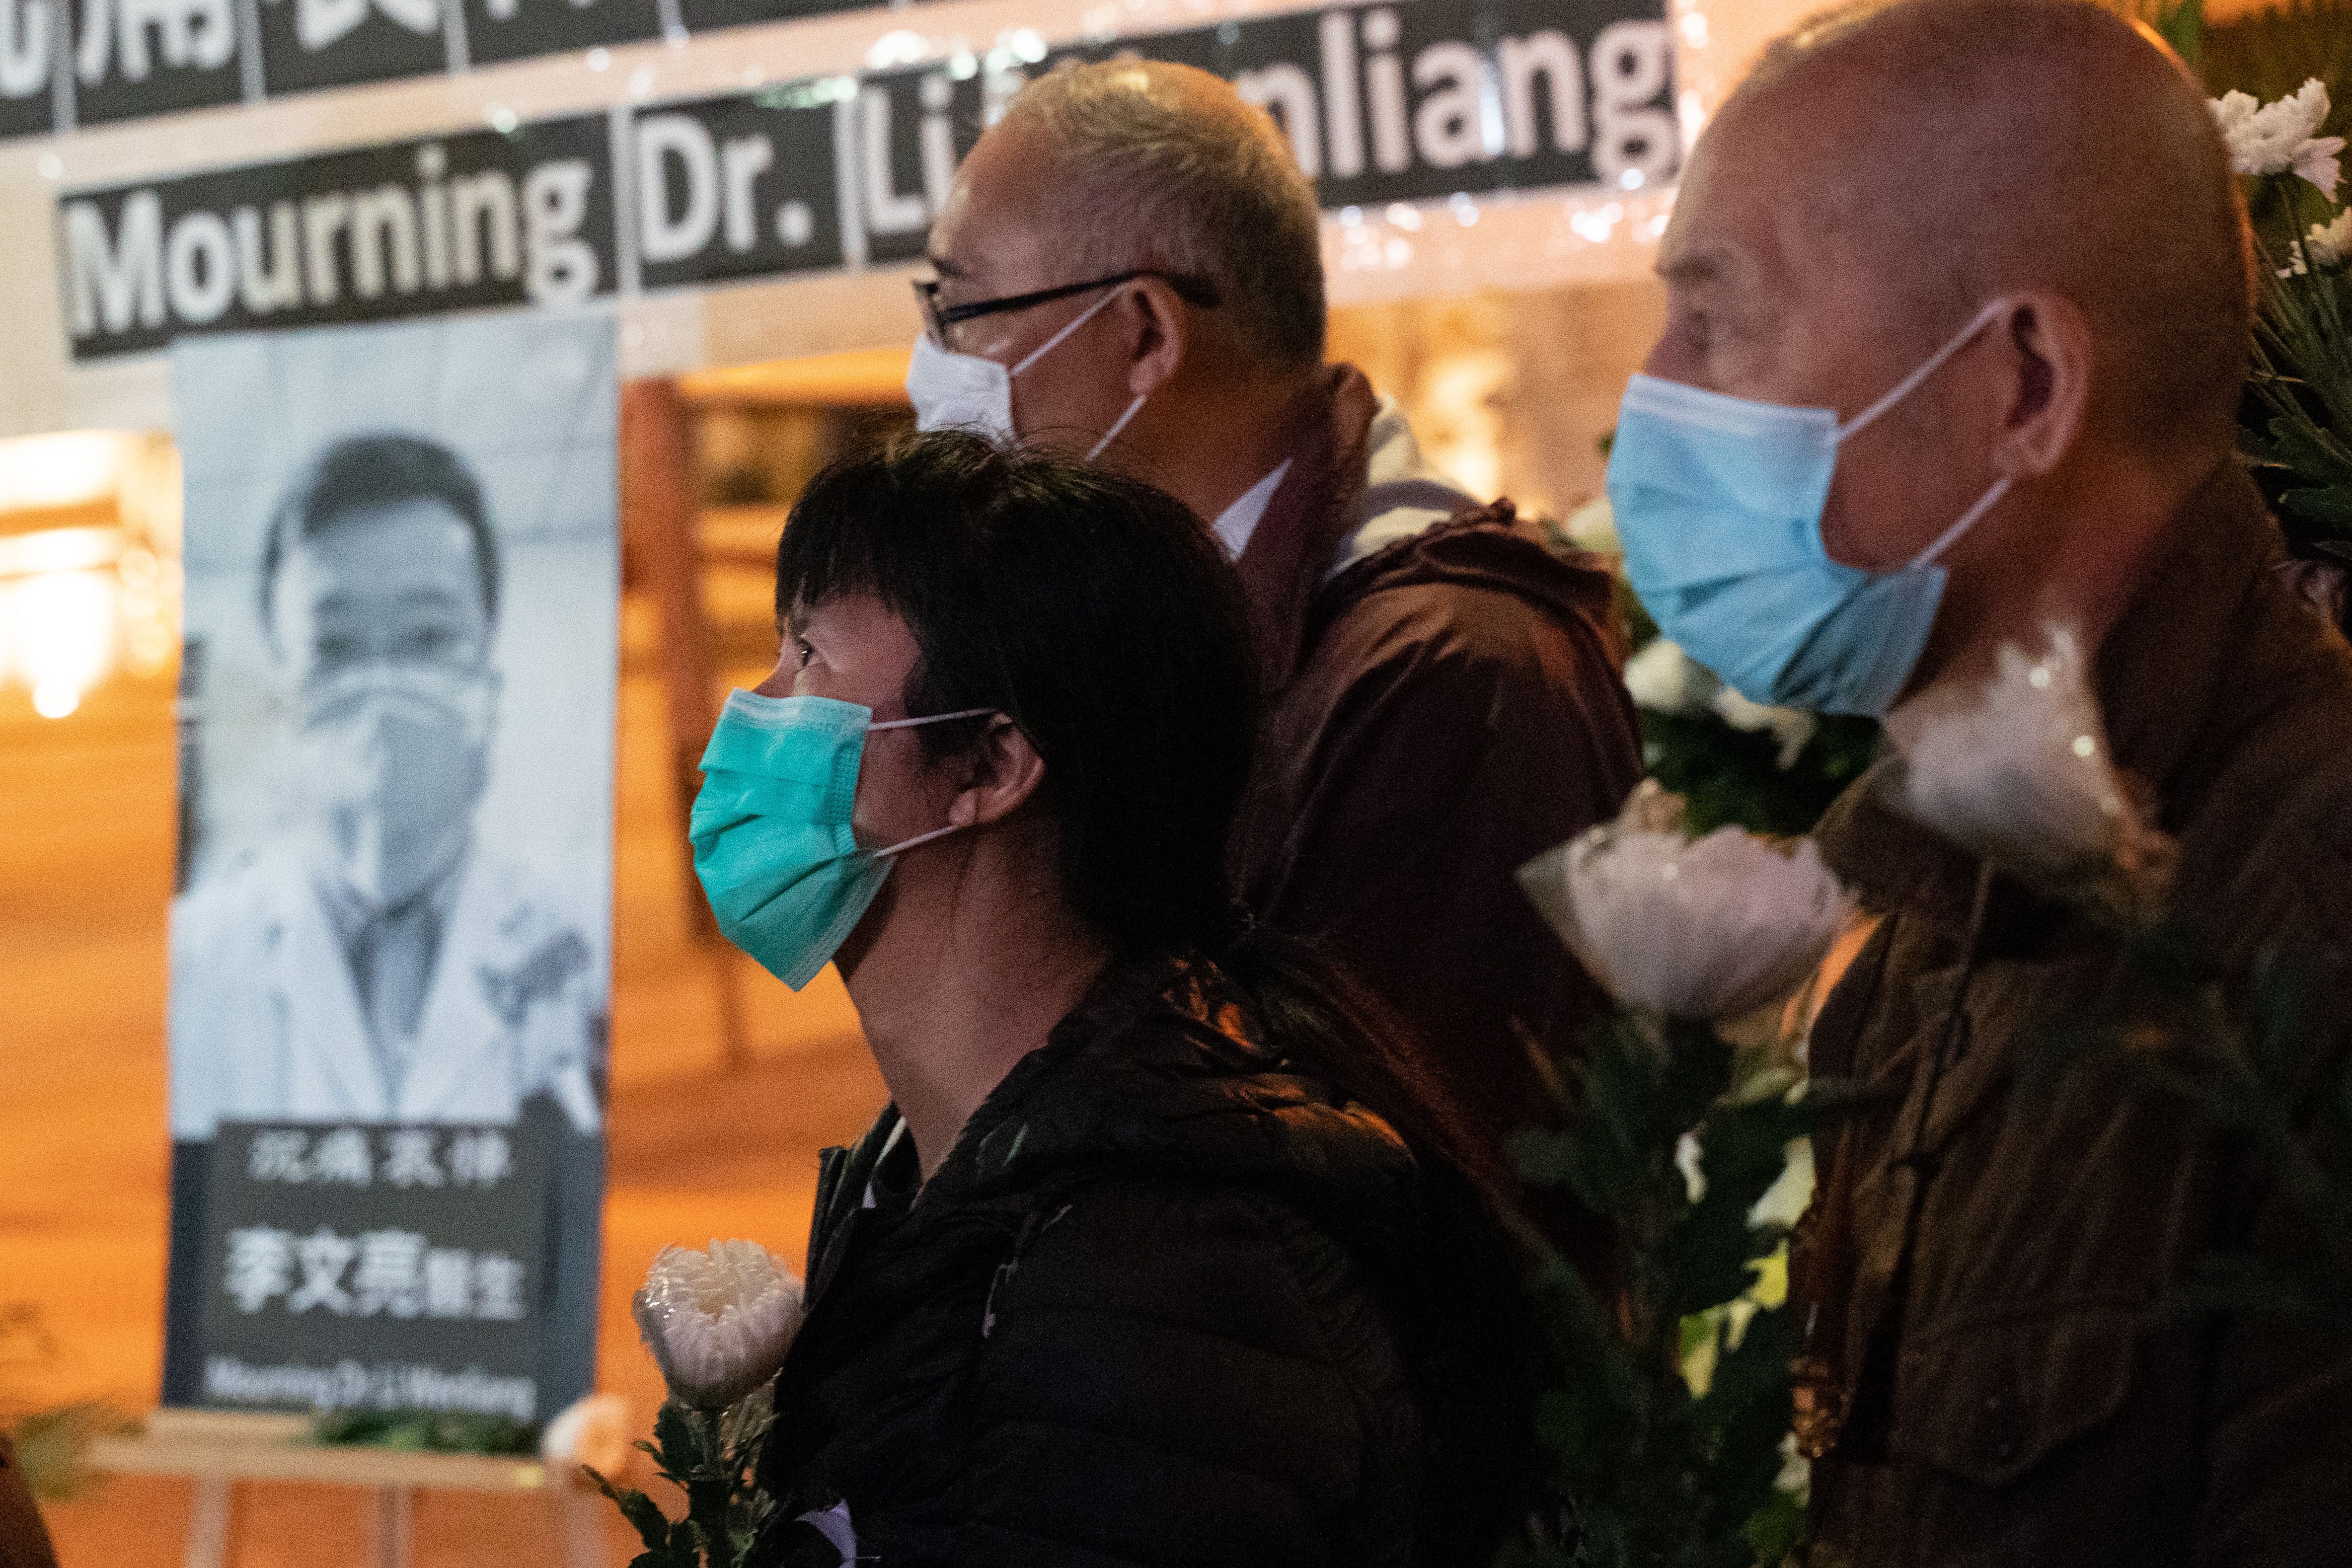 In this image, people with protective face masks stand next to a photo of Dr. Li and a sign that says "Mourning Dr. Li" 